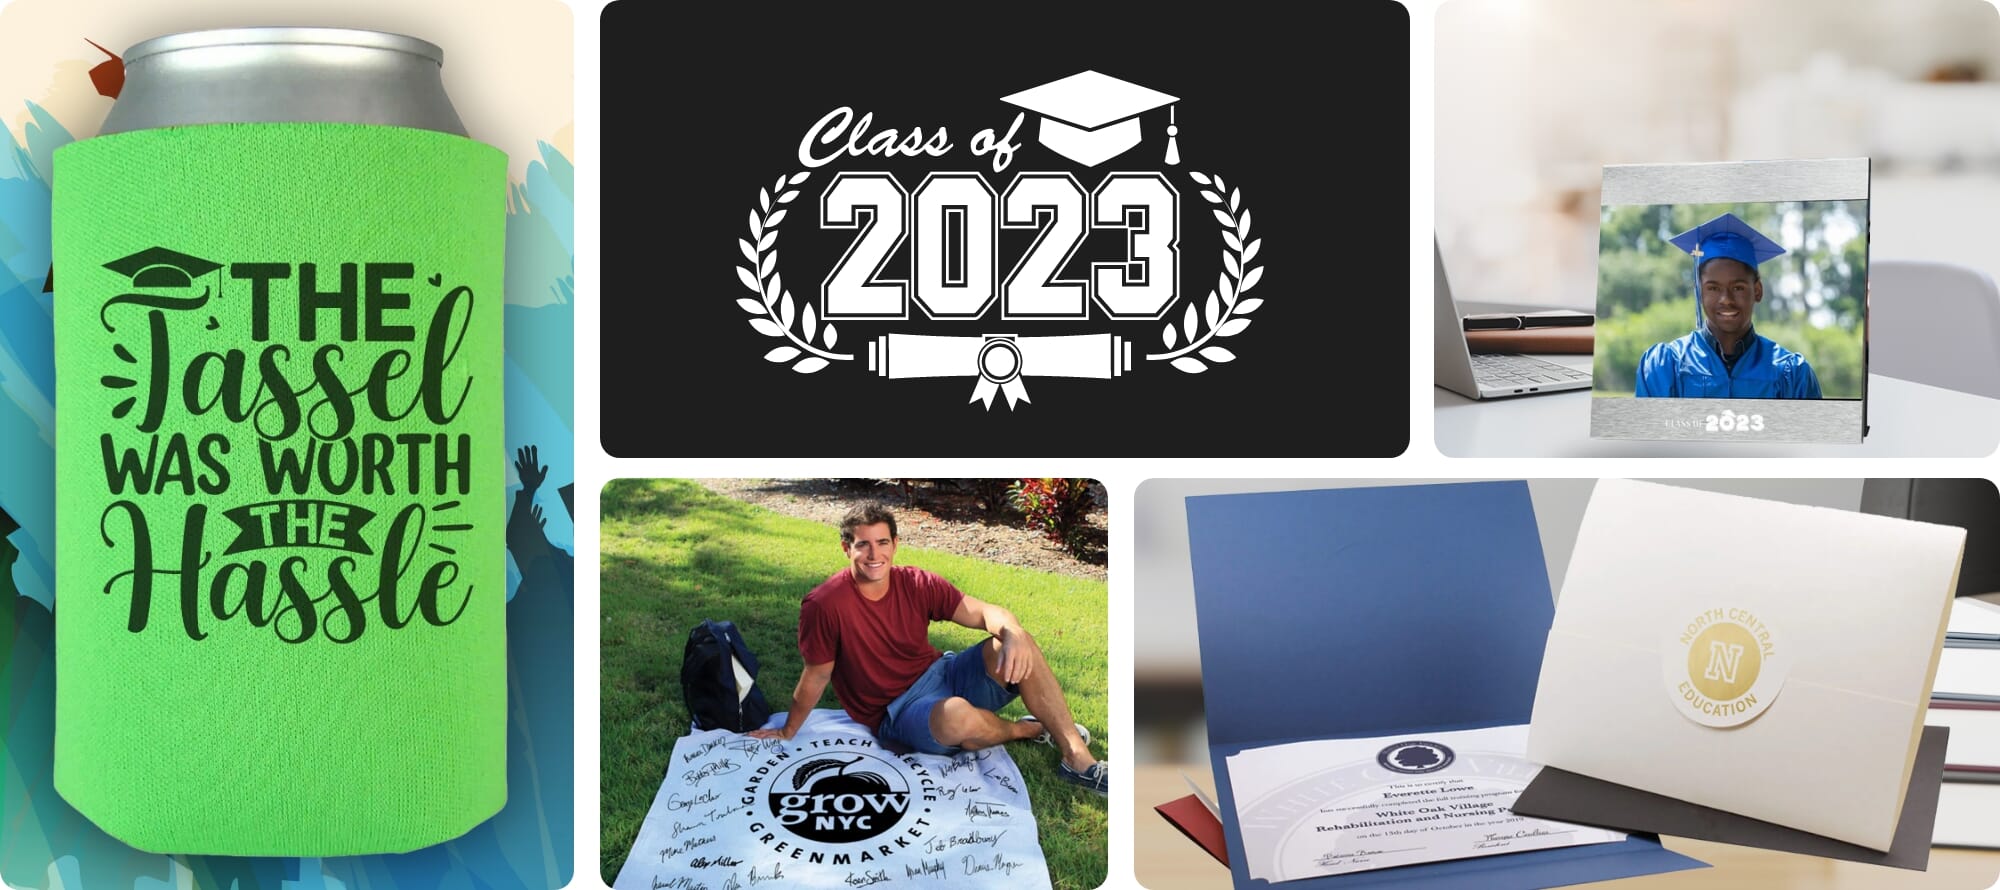 collage of graduation scenes and logos